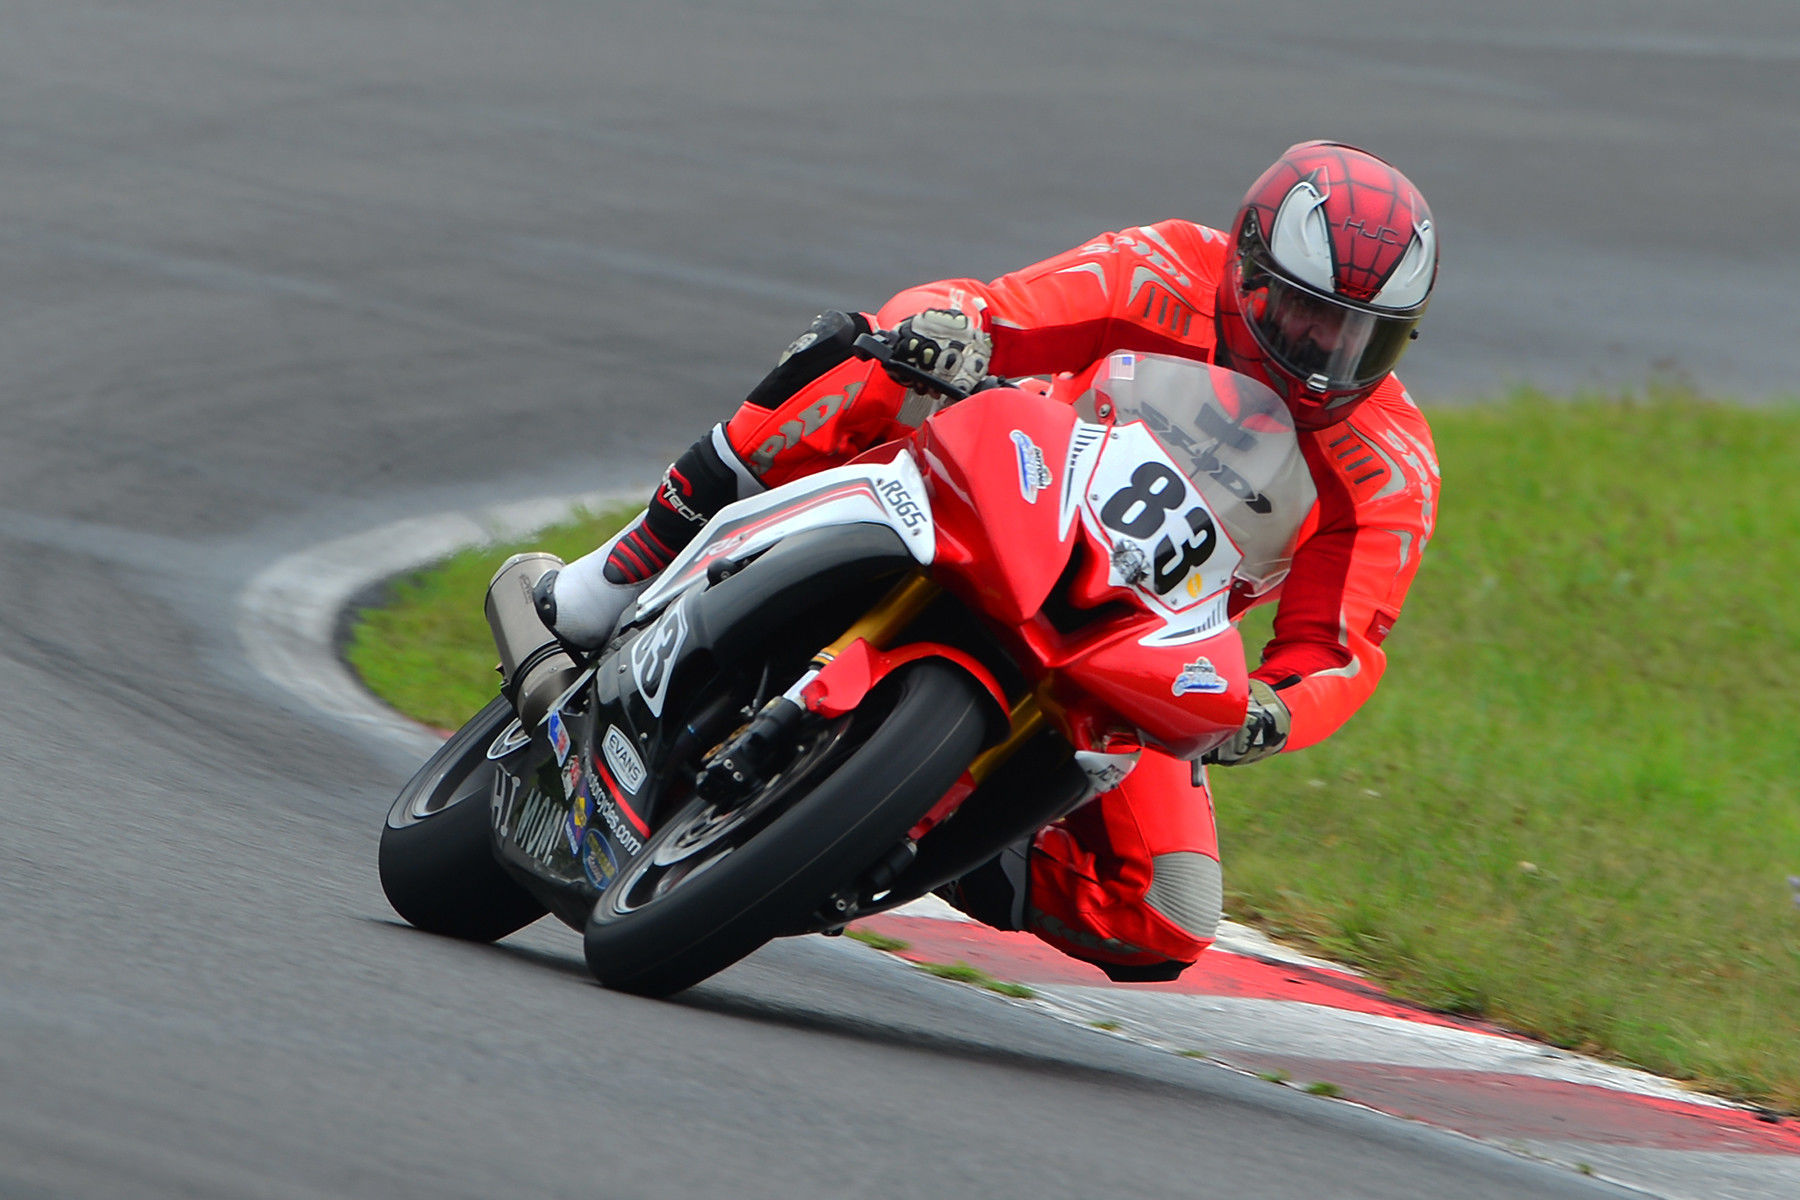 Arthur Diaz (83) ran undefeated on his Yamaha R6/565 Saturday in the Championship Cup Series Mid-Atlantic event at Summit Point Raceway. Photo by Lisa Theobald, courtesy ASRA/CCS.